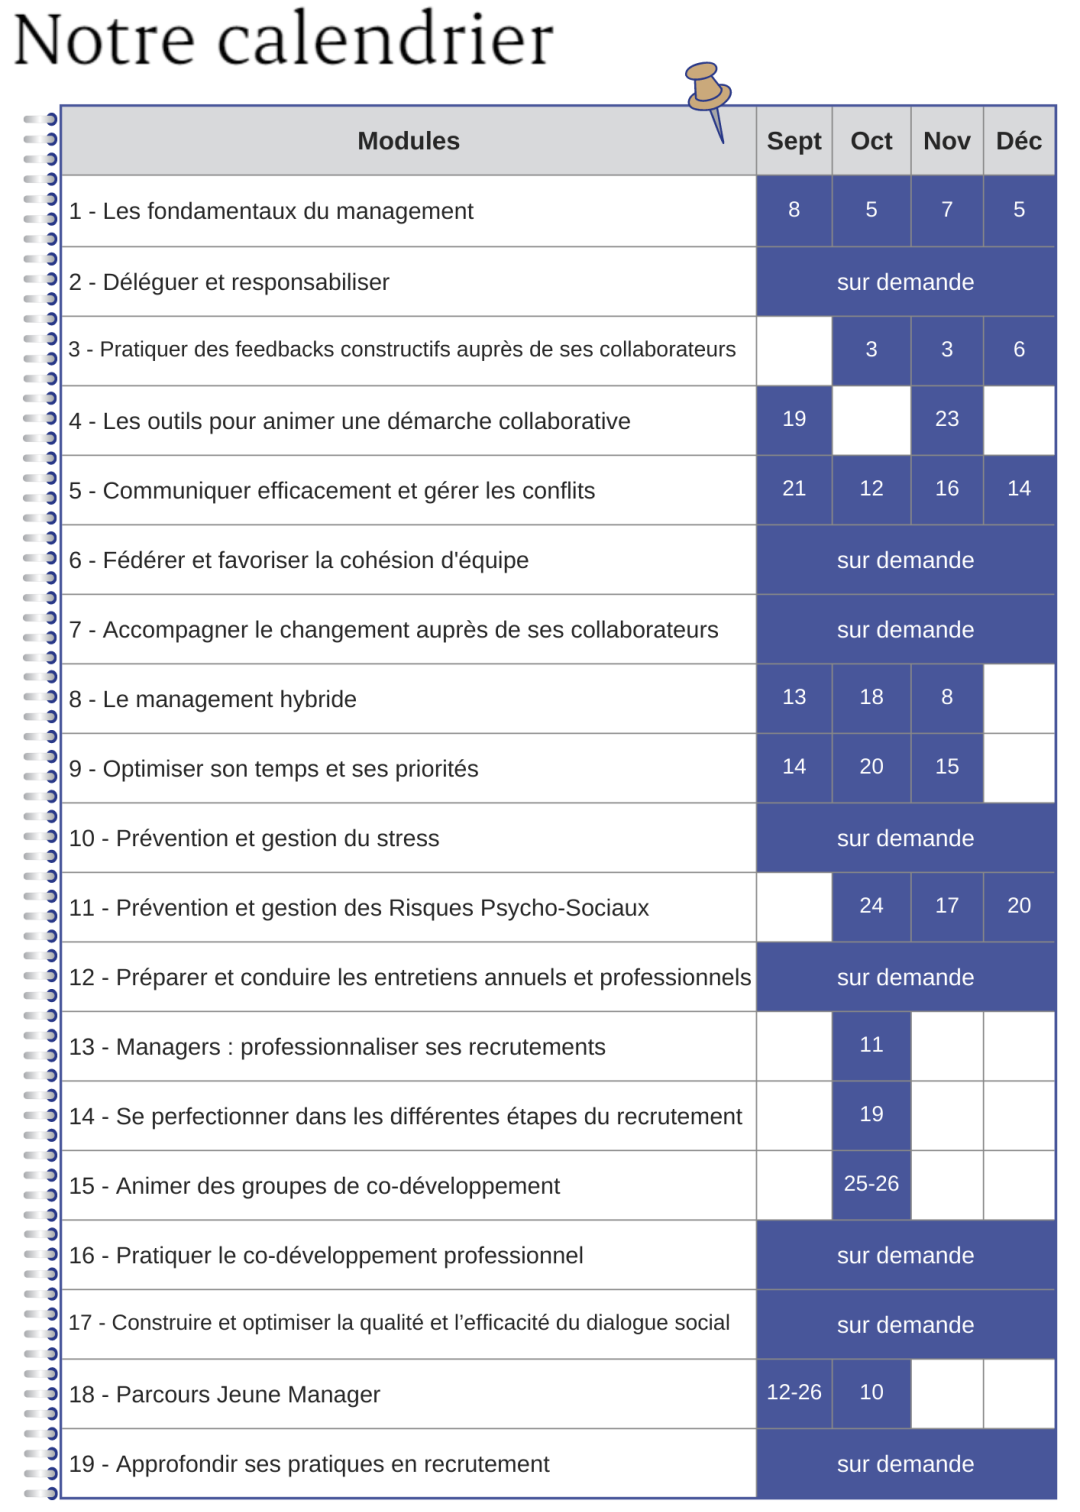 Calendrier des formations